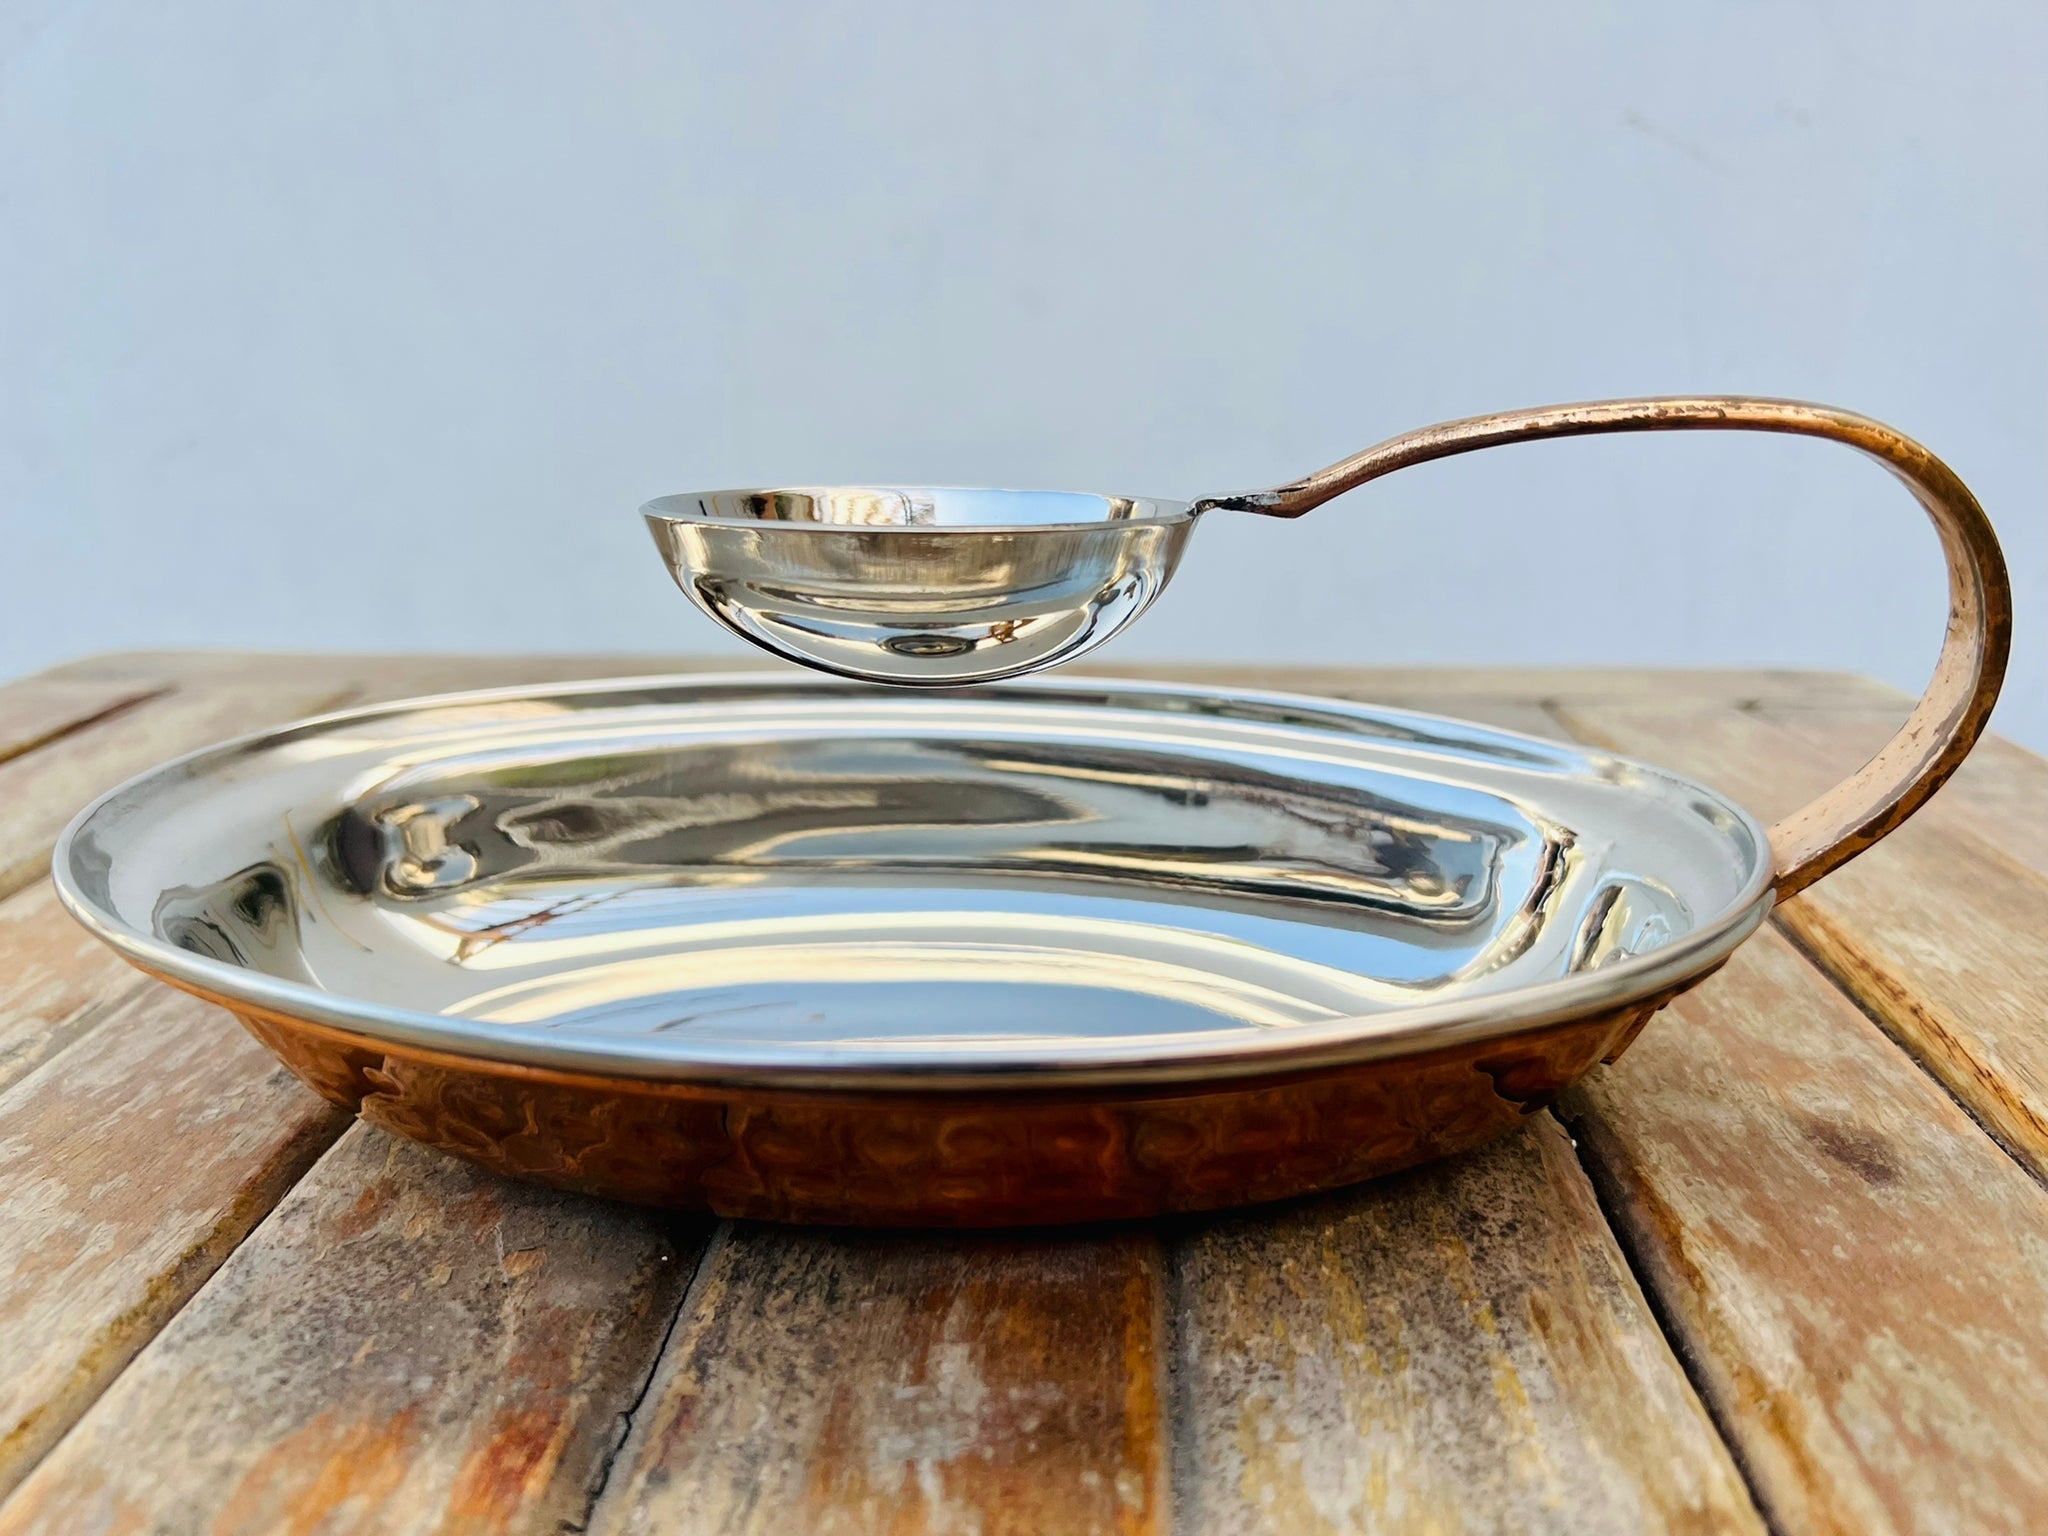 Oval hammered copper bowl with a dip bowl top